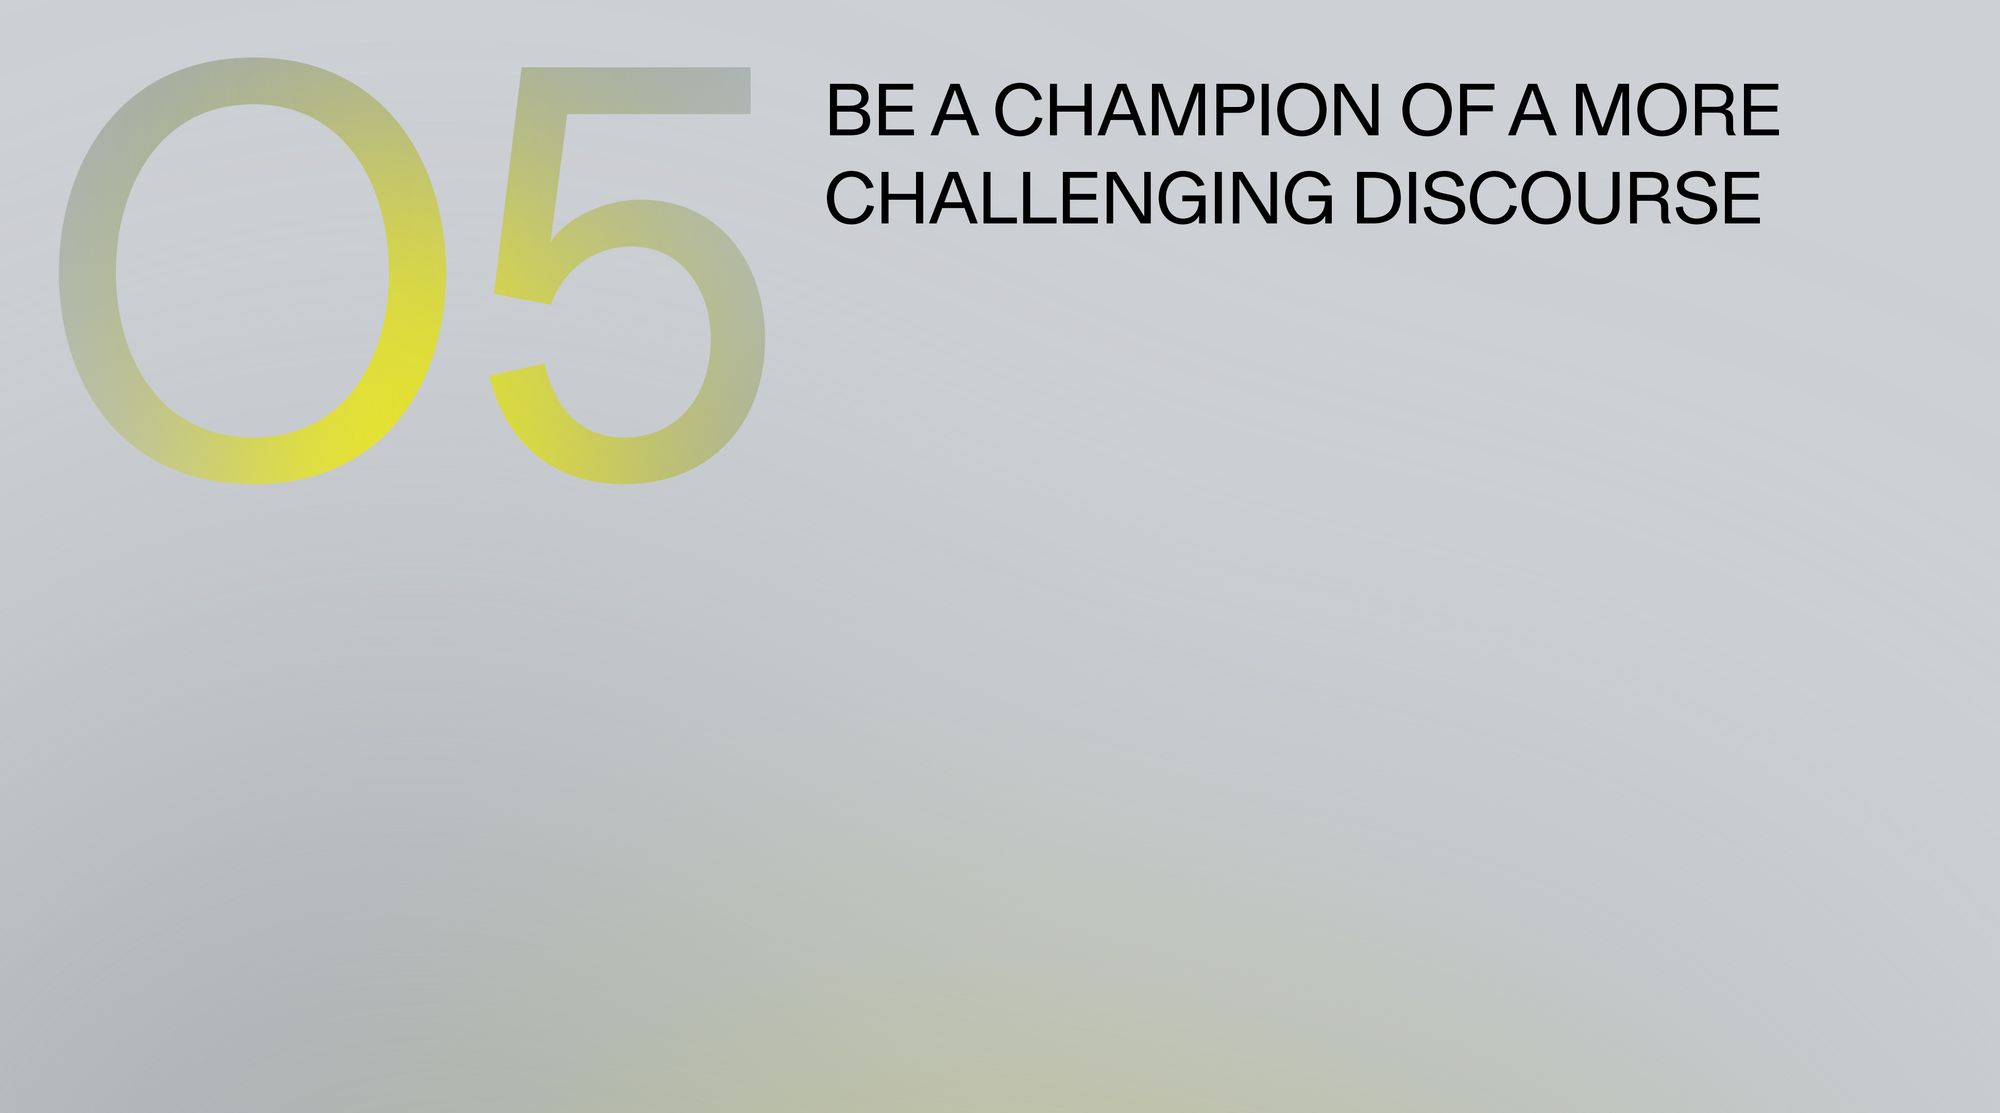 Be a champion of a more challenging discourse.